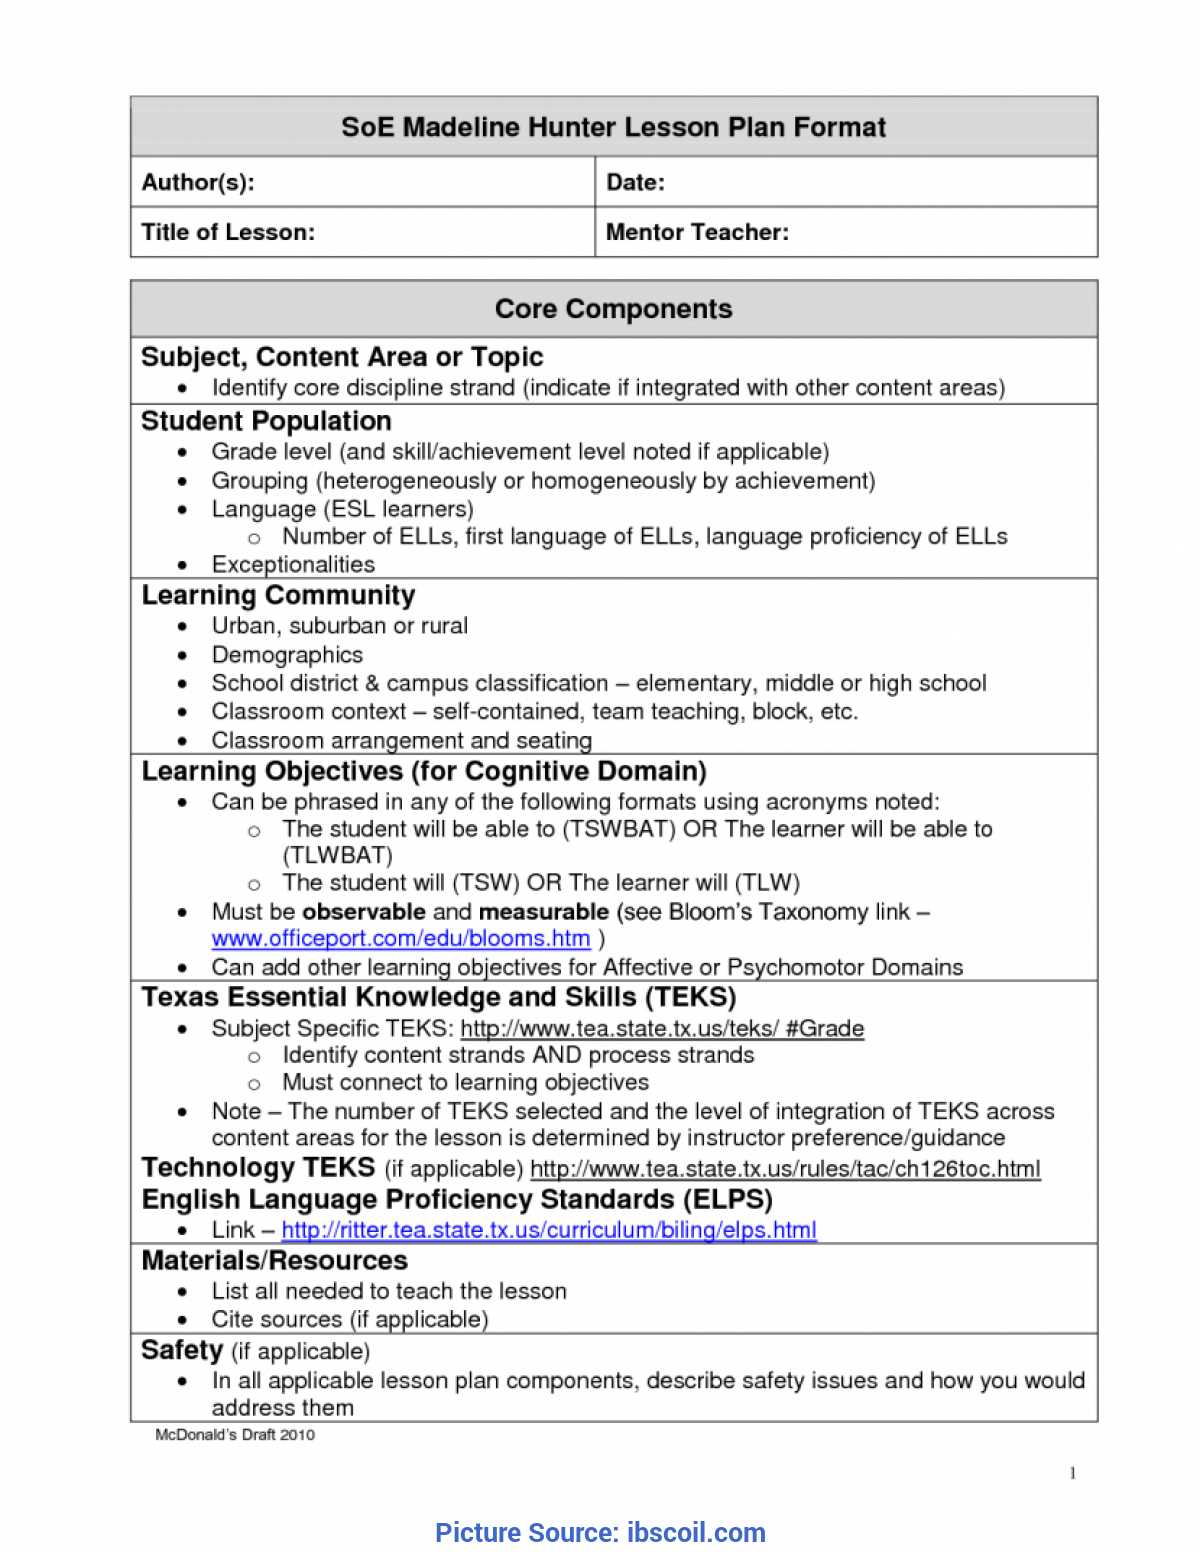 Madeline Hunter Lesson Plan Template Twiroo Com | Lesso In Madeline Hunter Lesson Plan Blank Template